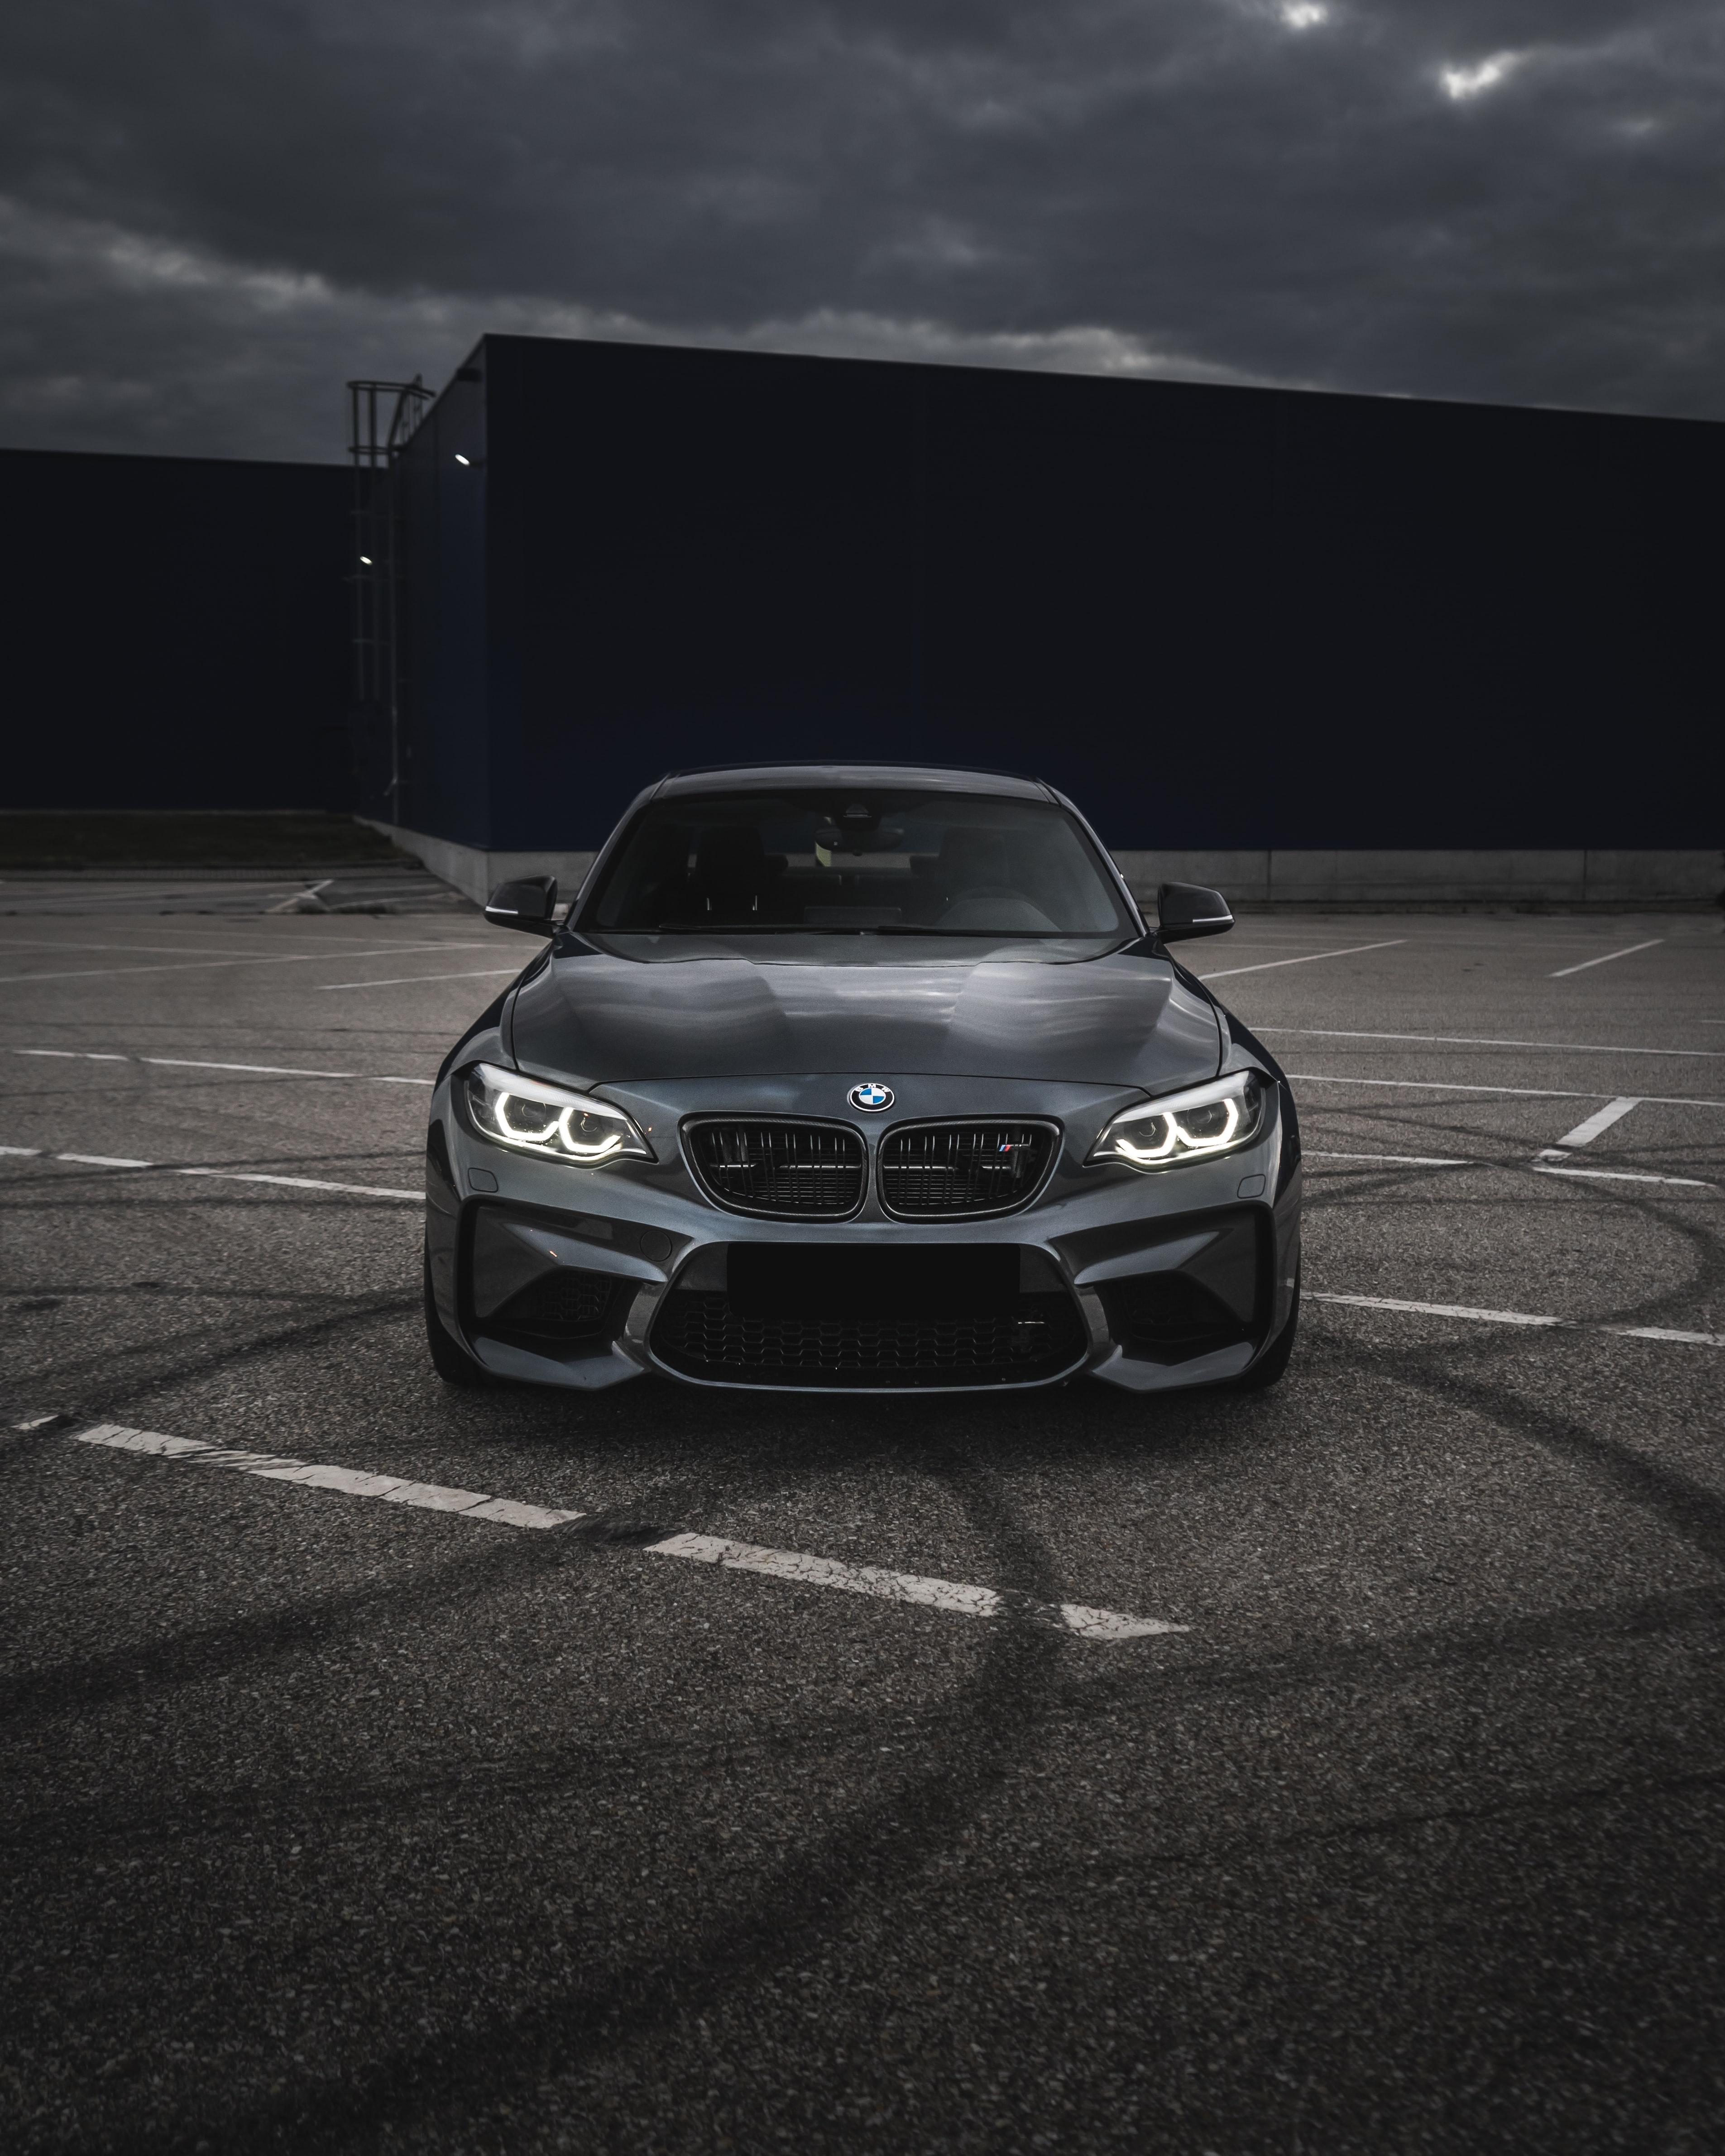 bmw, front view, cars, bmw m3, car, grey